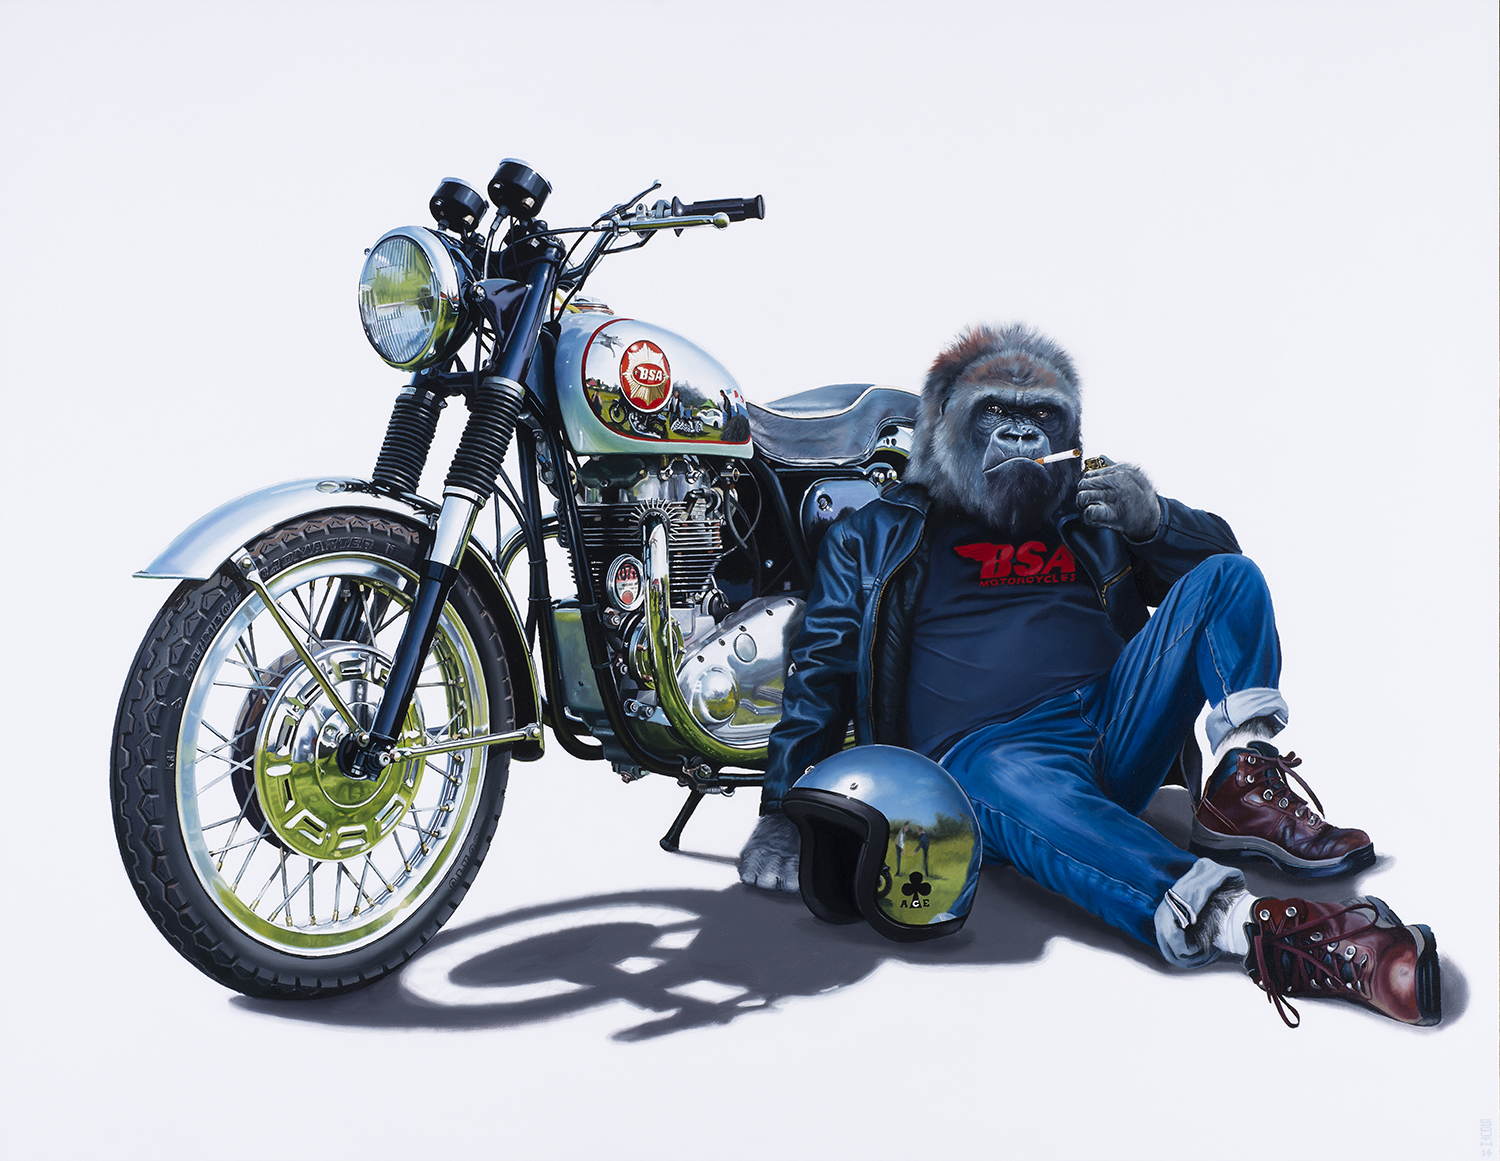 A gorilla lighting a cigarette while leaning on a BSA motorcycle - Tony South - Ace